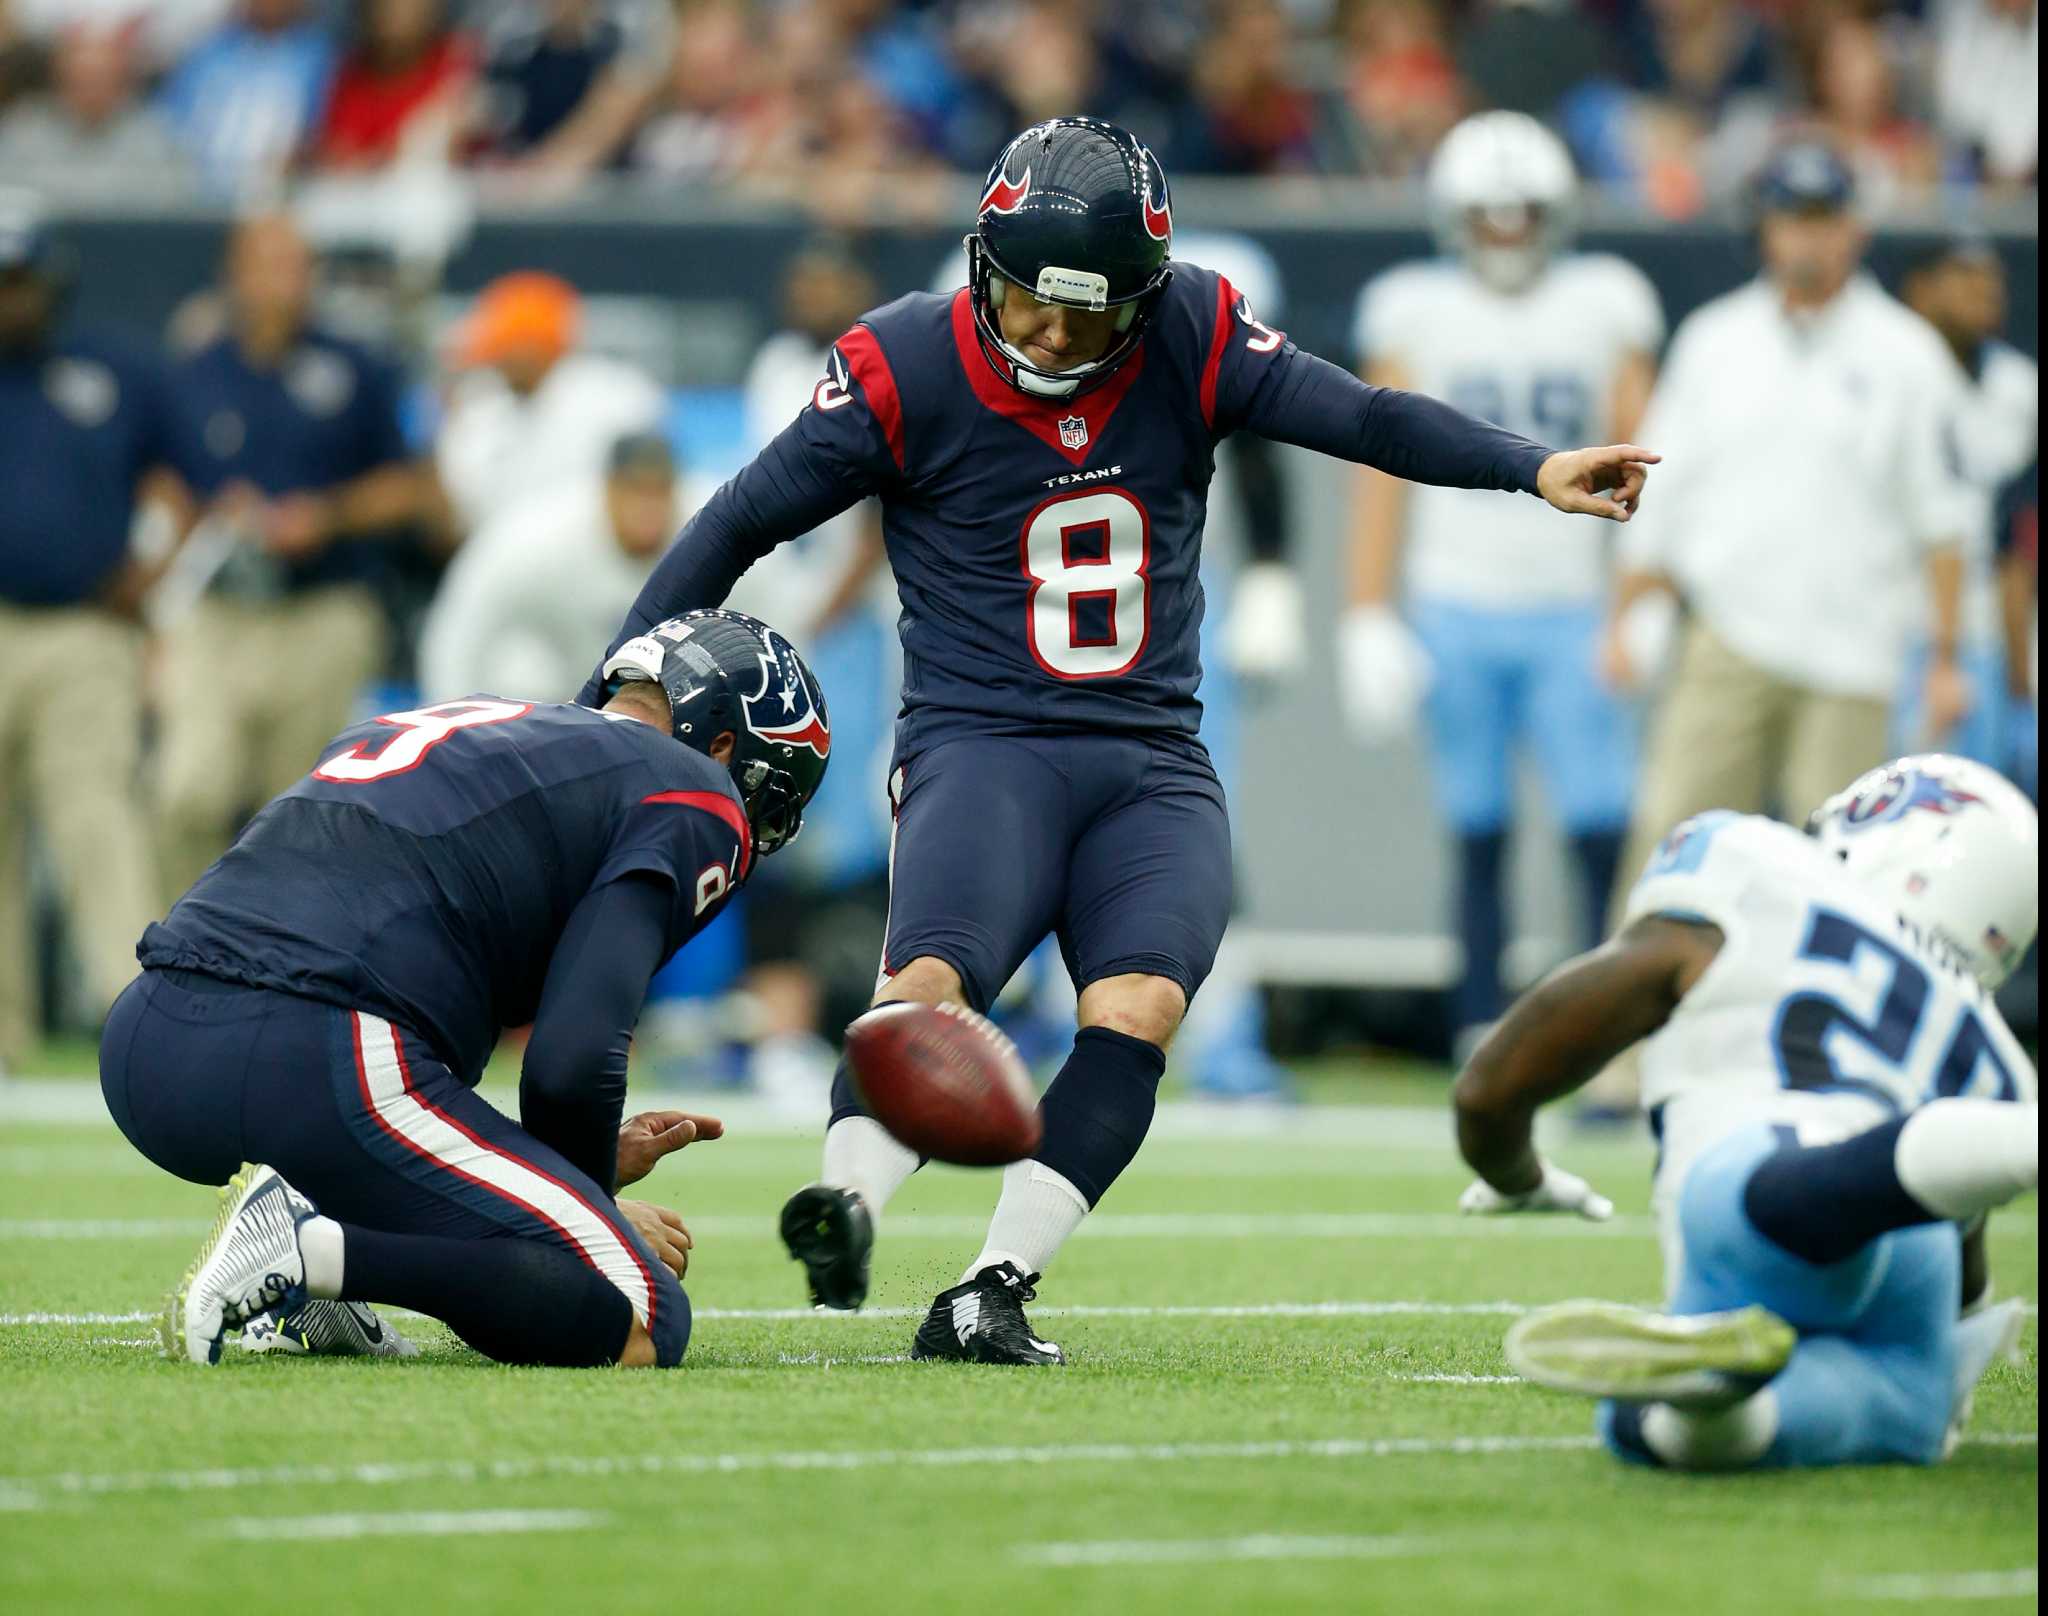 A football player, Nick Novak, is kicking the ball in a game.